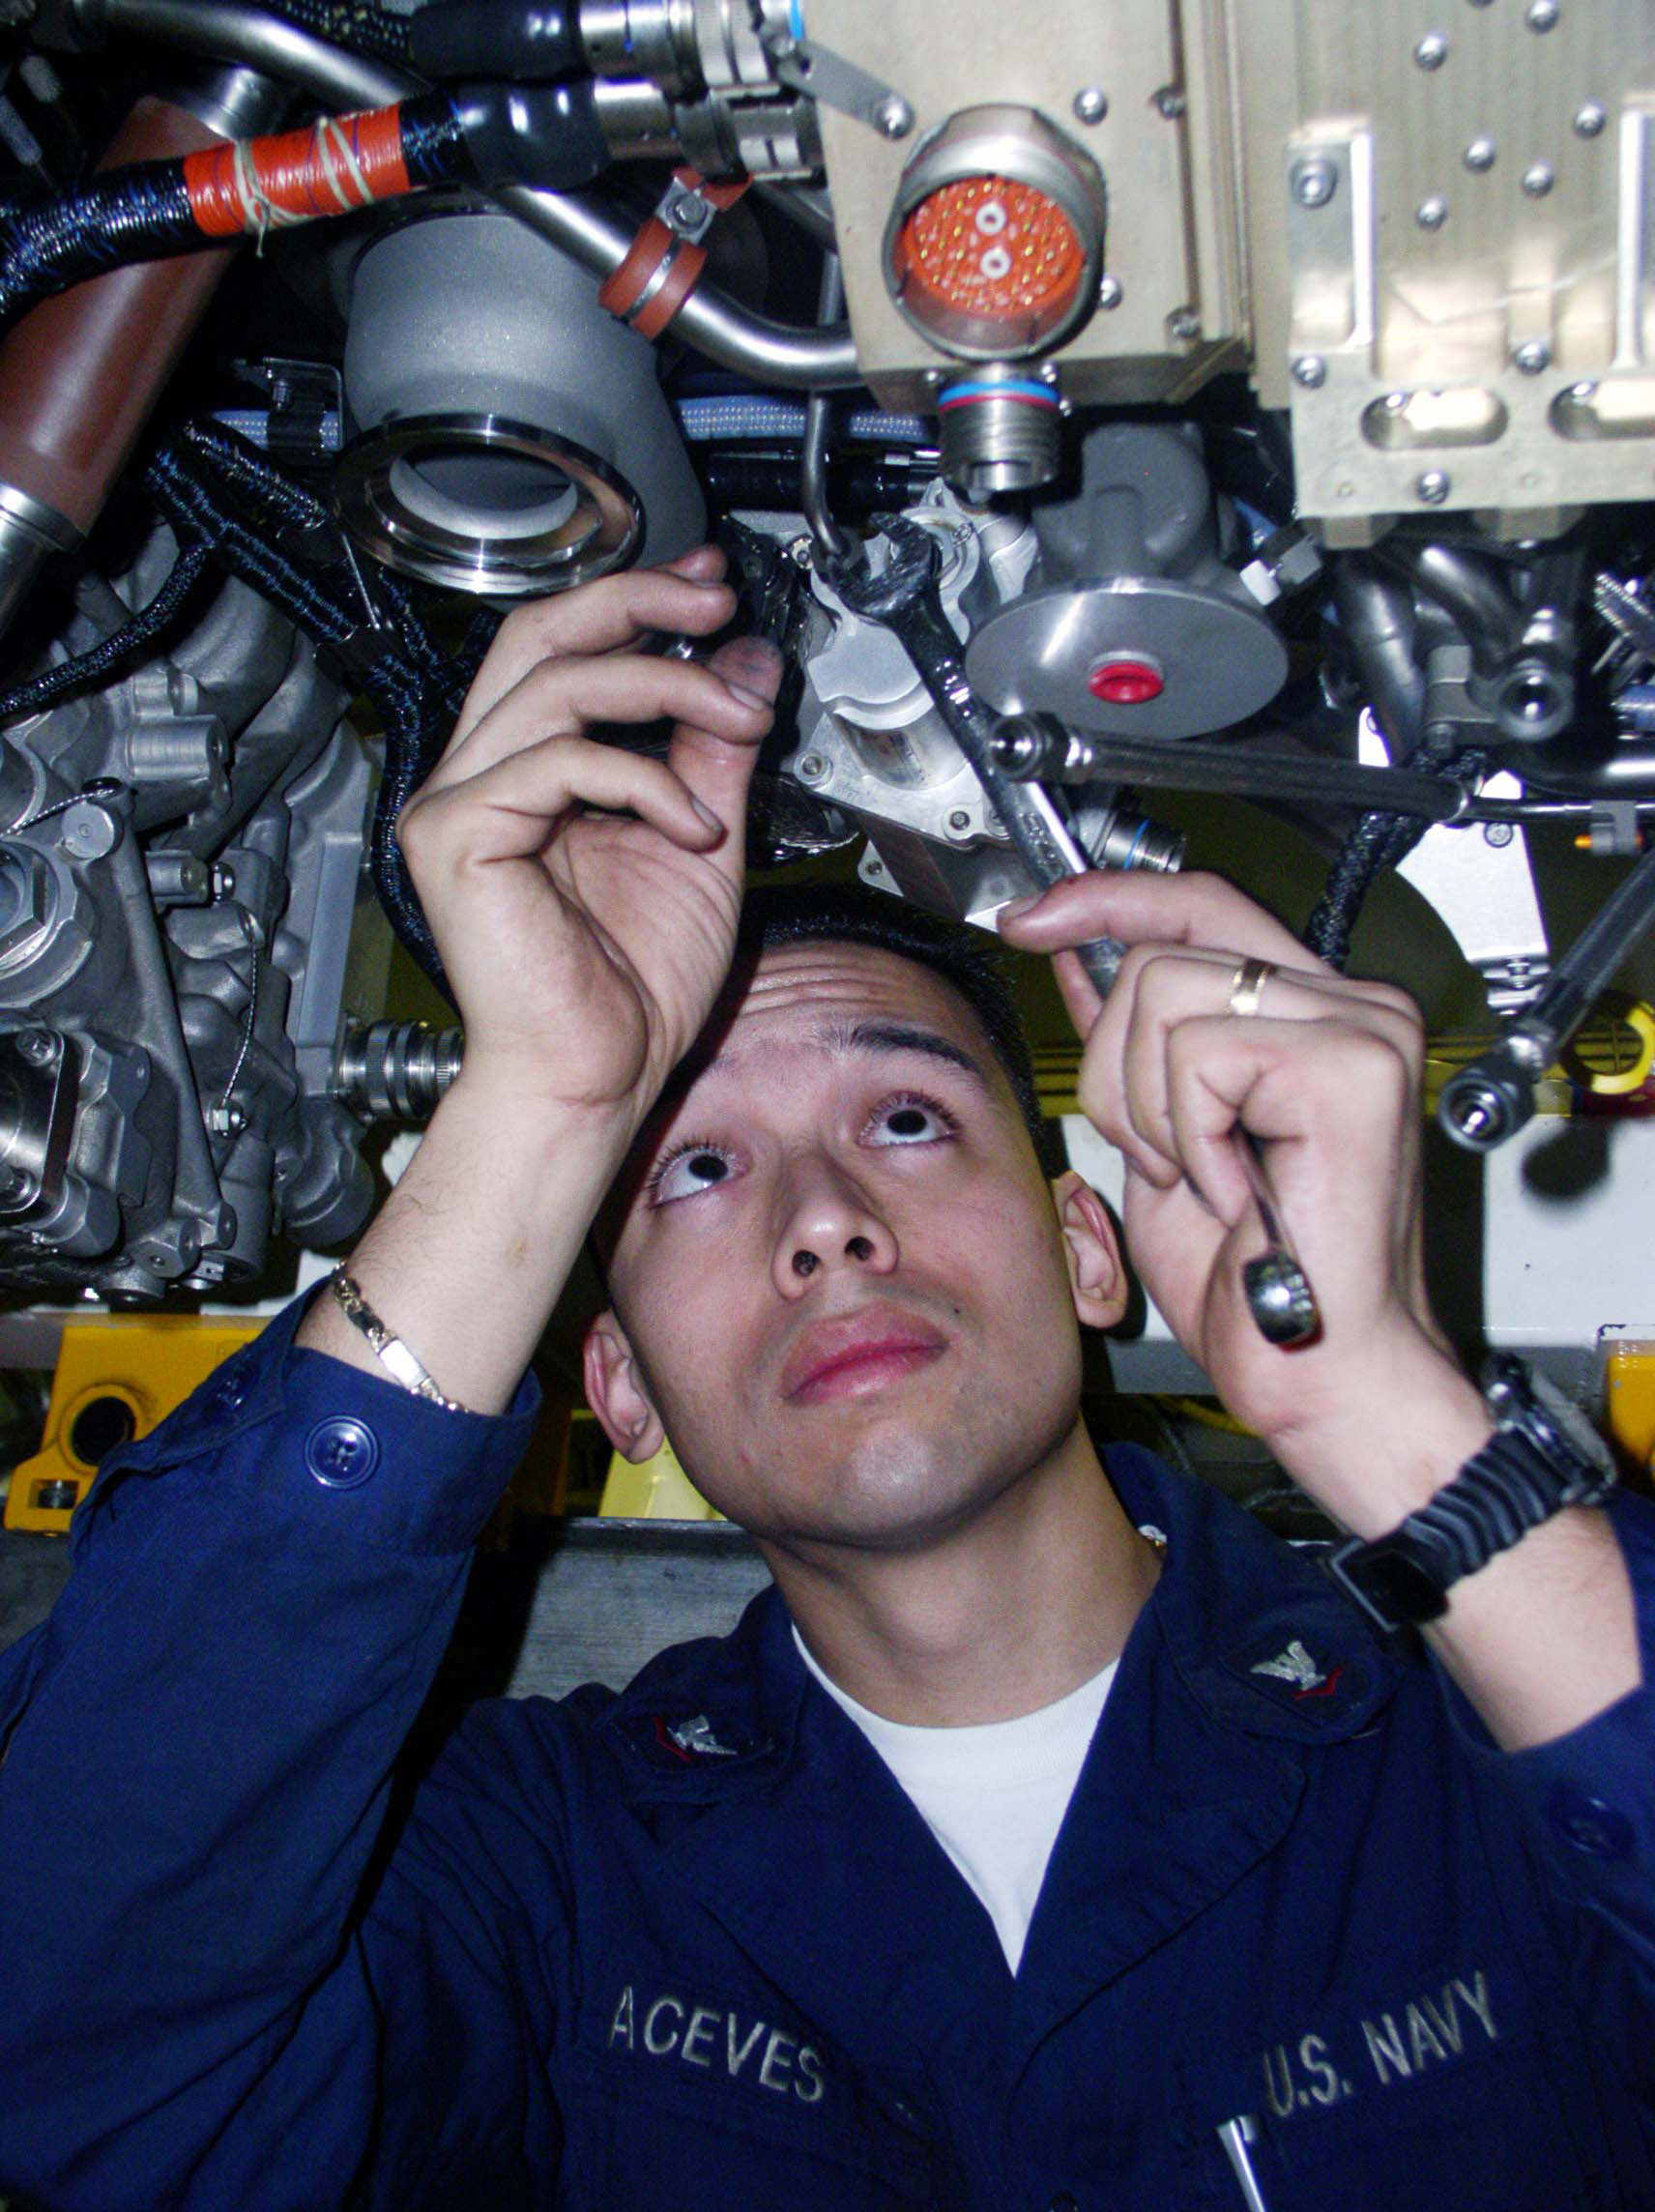 US Navy 030210-N-9228K-015 Aviation Machinist's Mate 3rd Class Anthony Aceves torques a nut on the engine of an F-A-18E Super Hornet